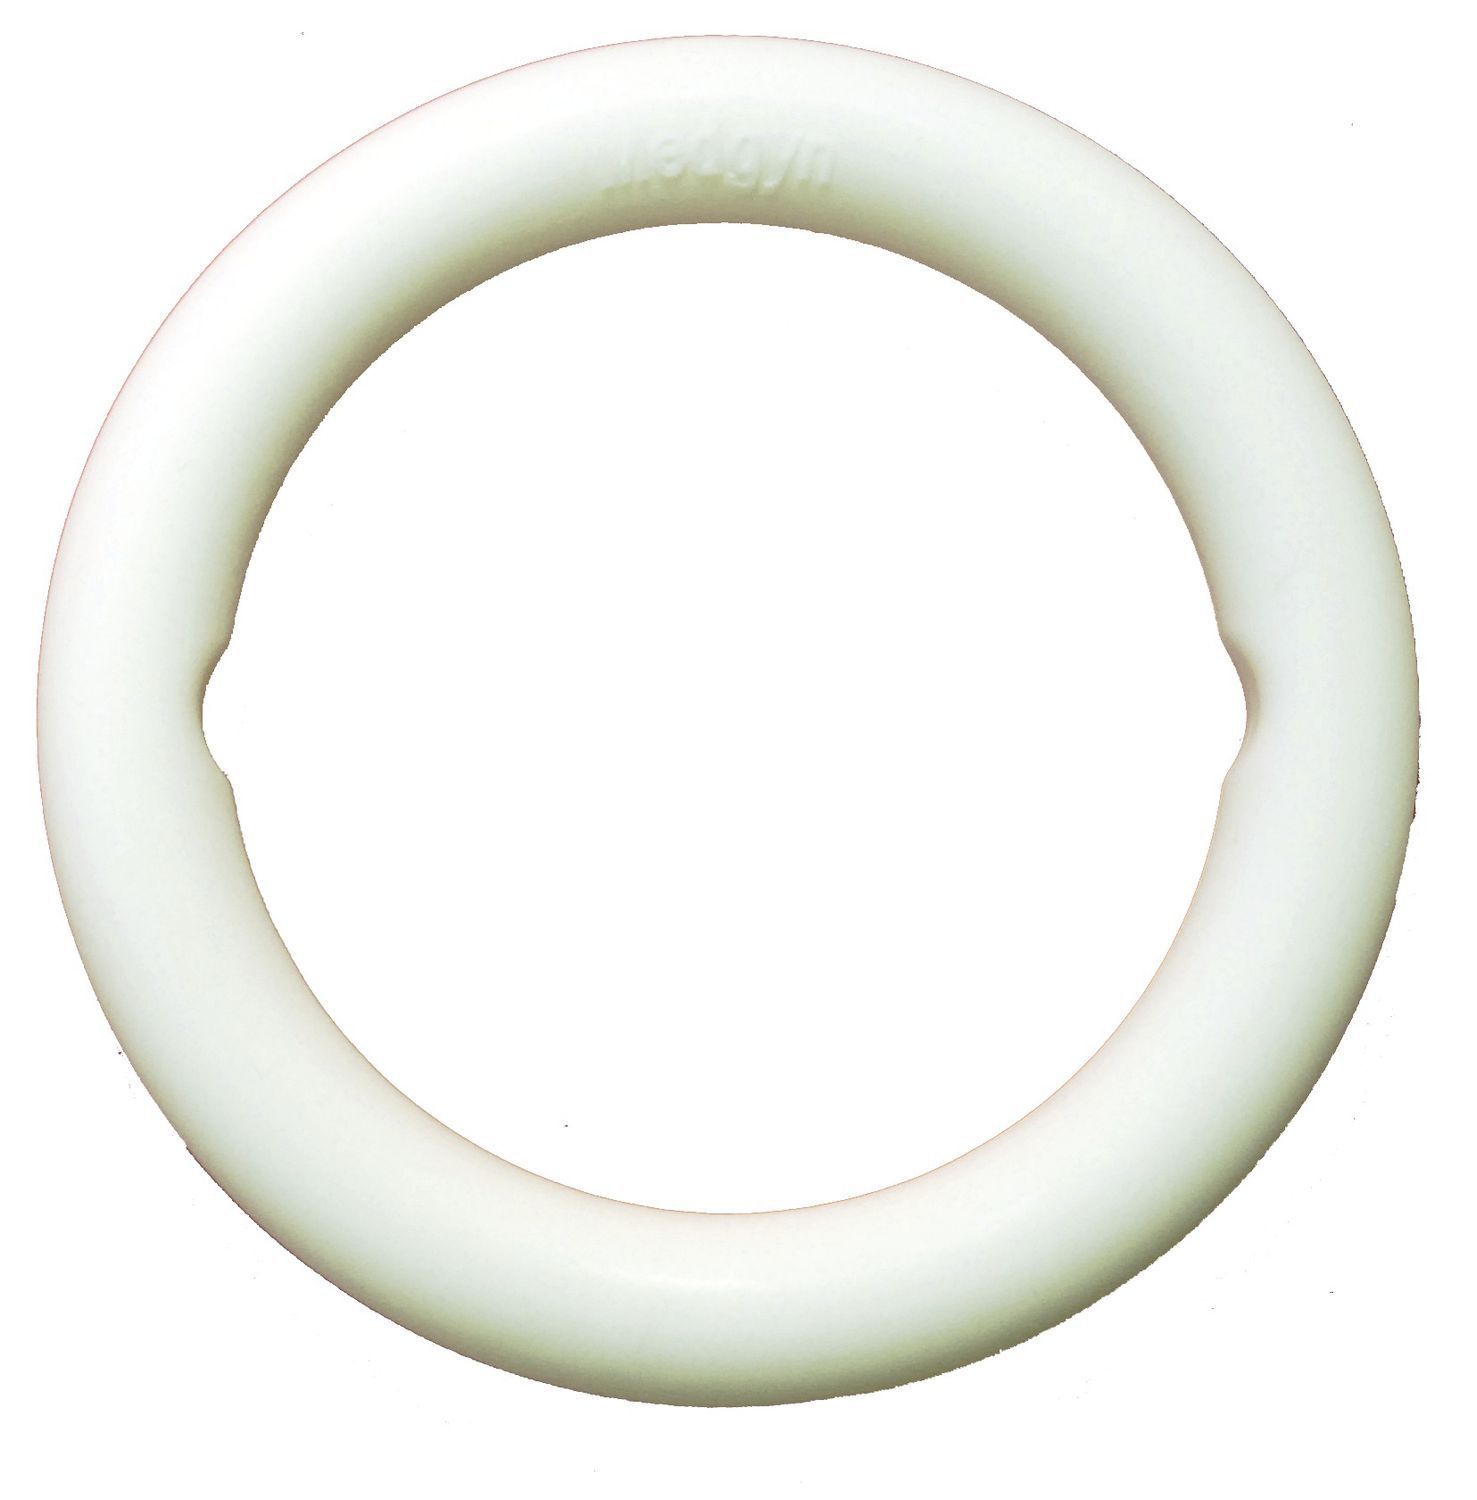 Ring vaginal pessary / without support 050017, 050025 Medgyn Products